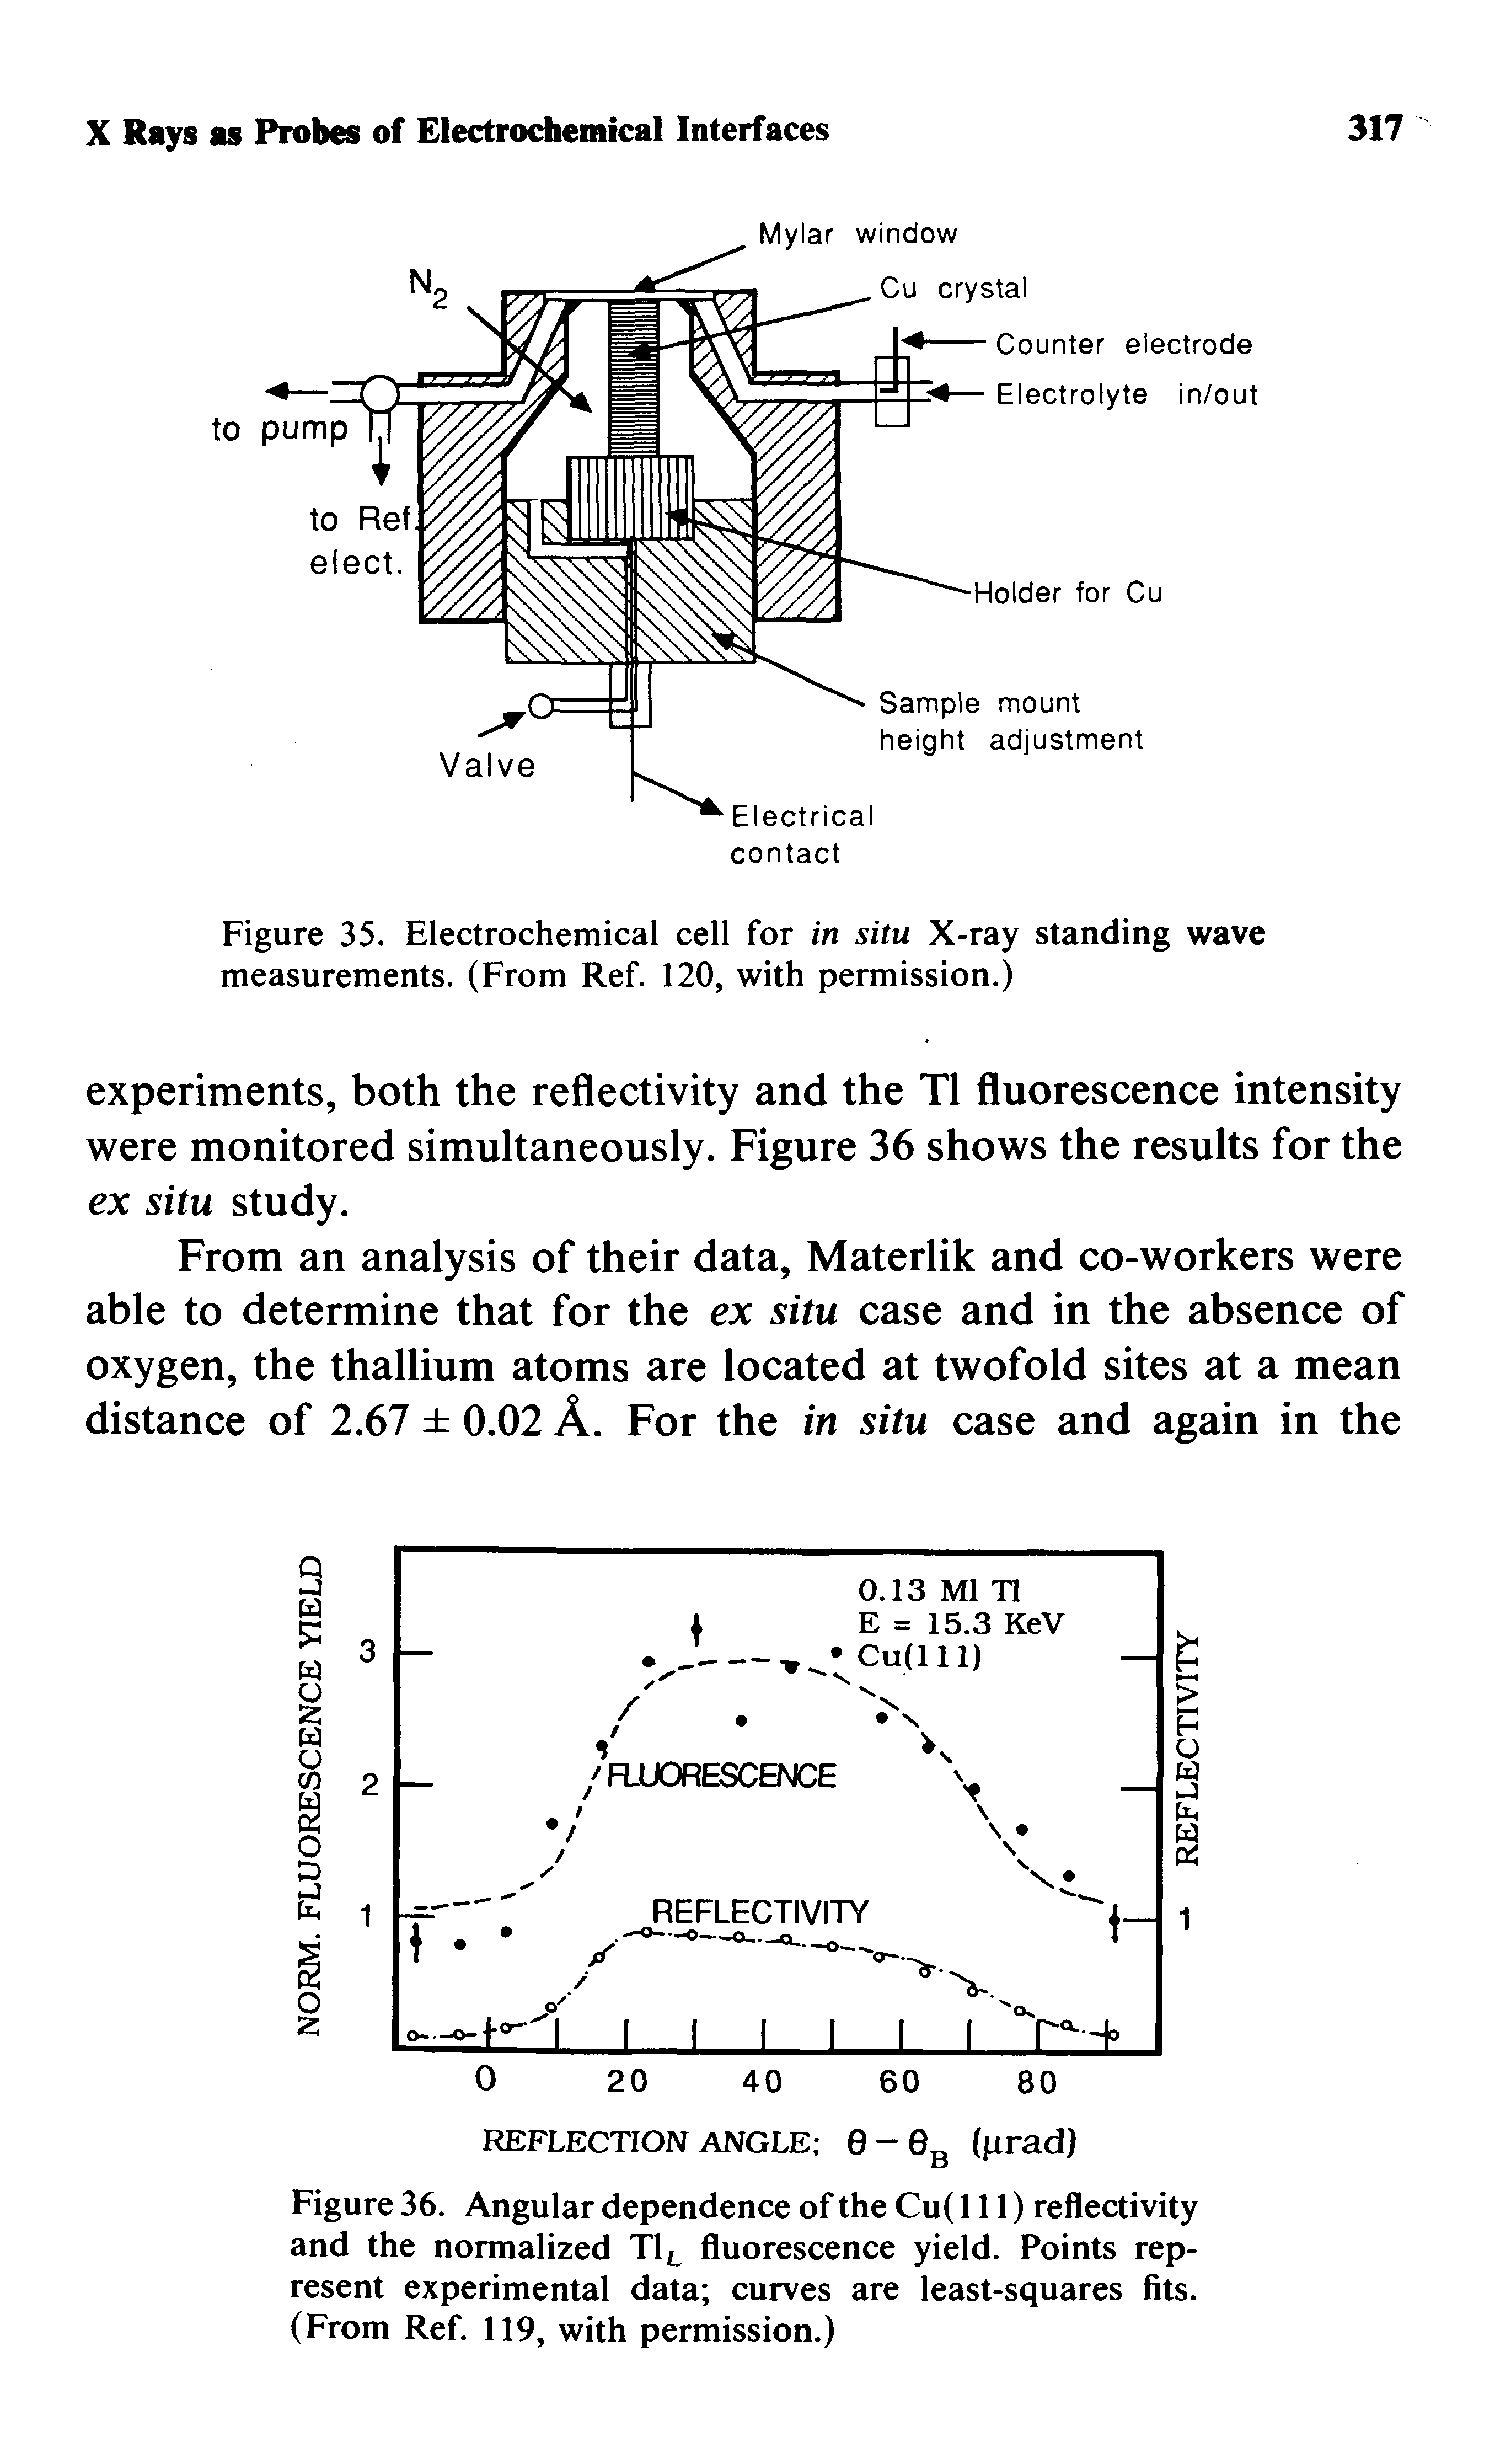 Figure 35. Electrochemical cell for in situ X-ray standing wave measurements. (From Ref. 120, with permission.)...